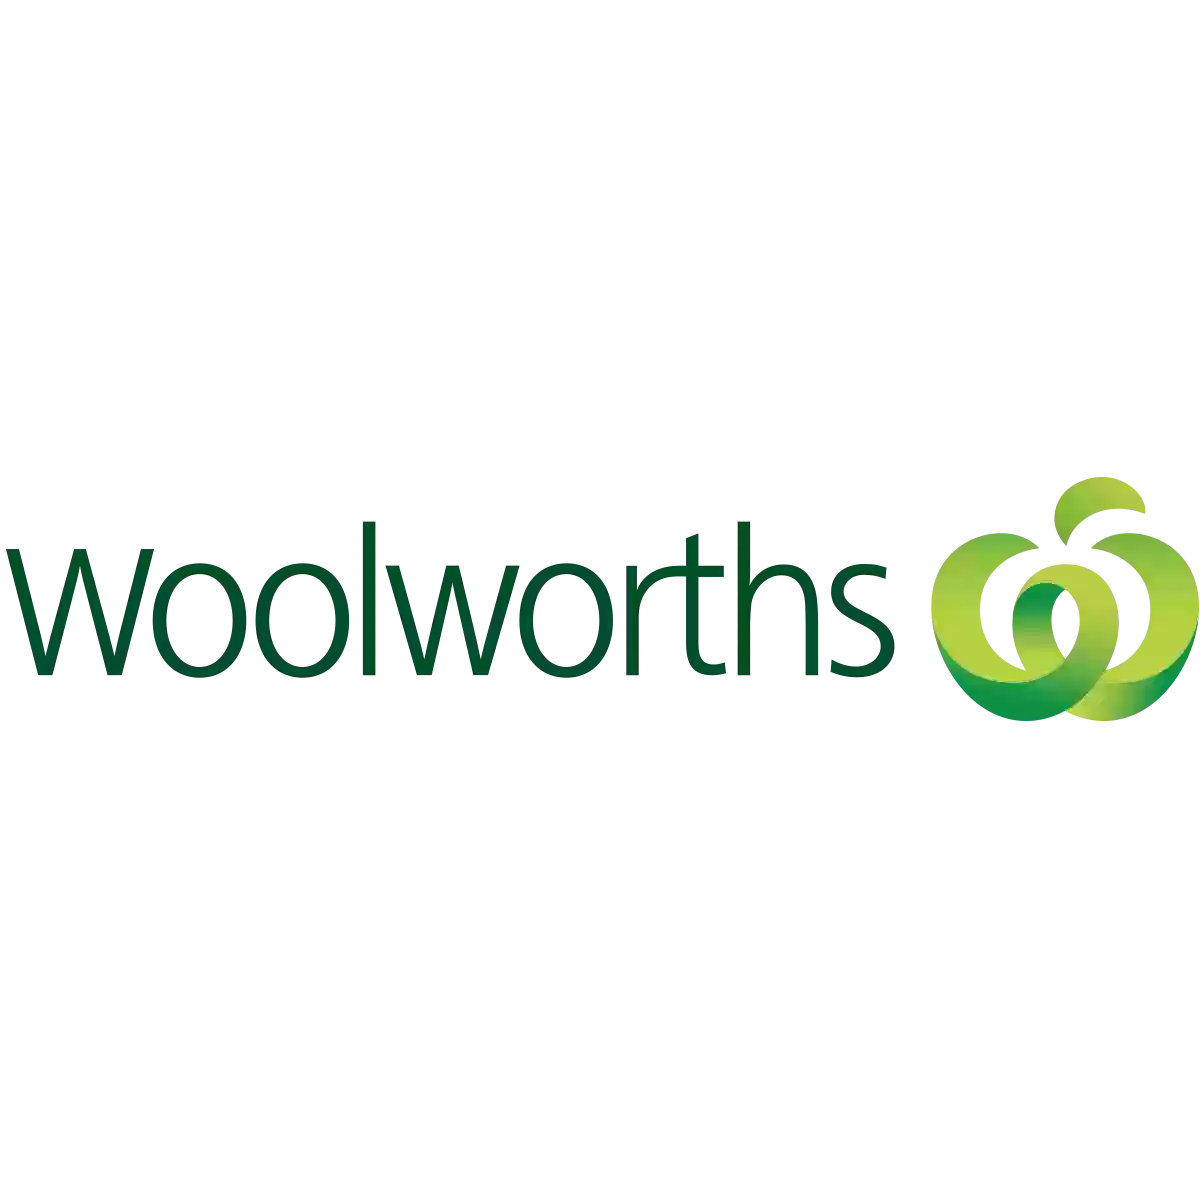 Woolworths Mowbray